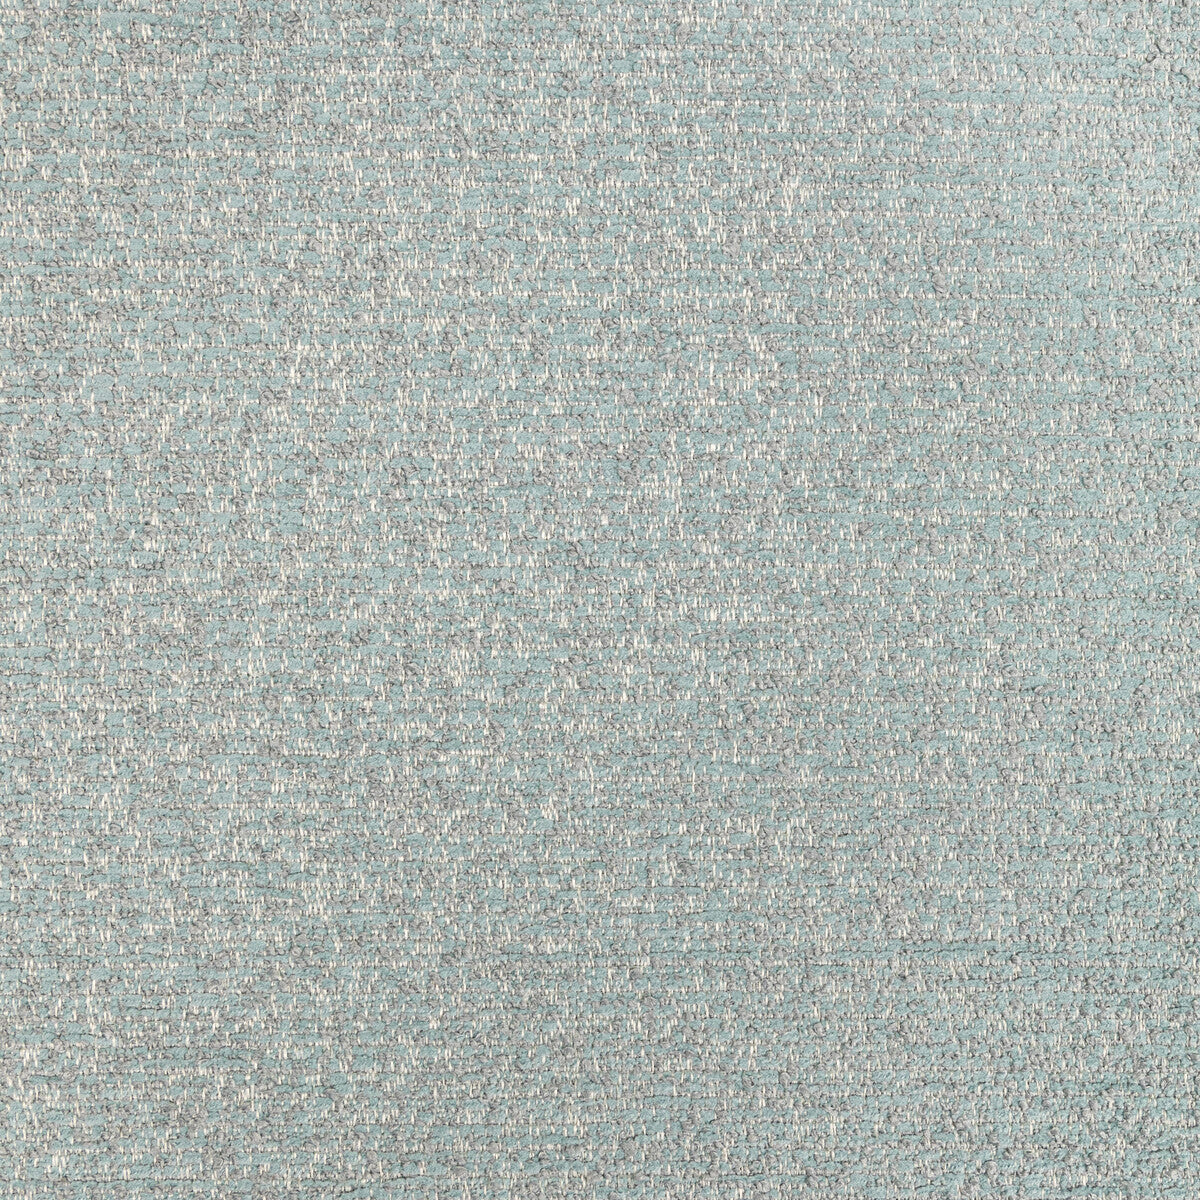 Serenity Now fabric in soothing spa color - pattern 36390.316.0 - by Kravet Design in the Crypton Home - Celliant collection